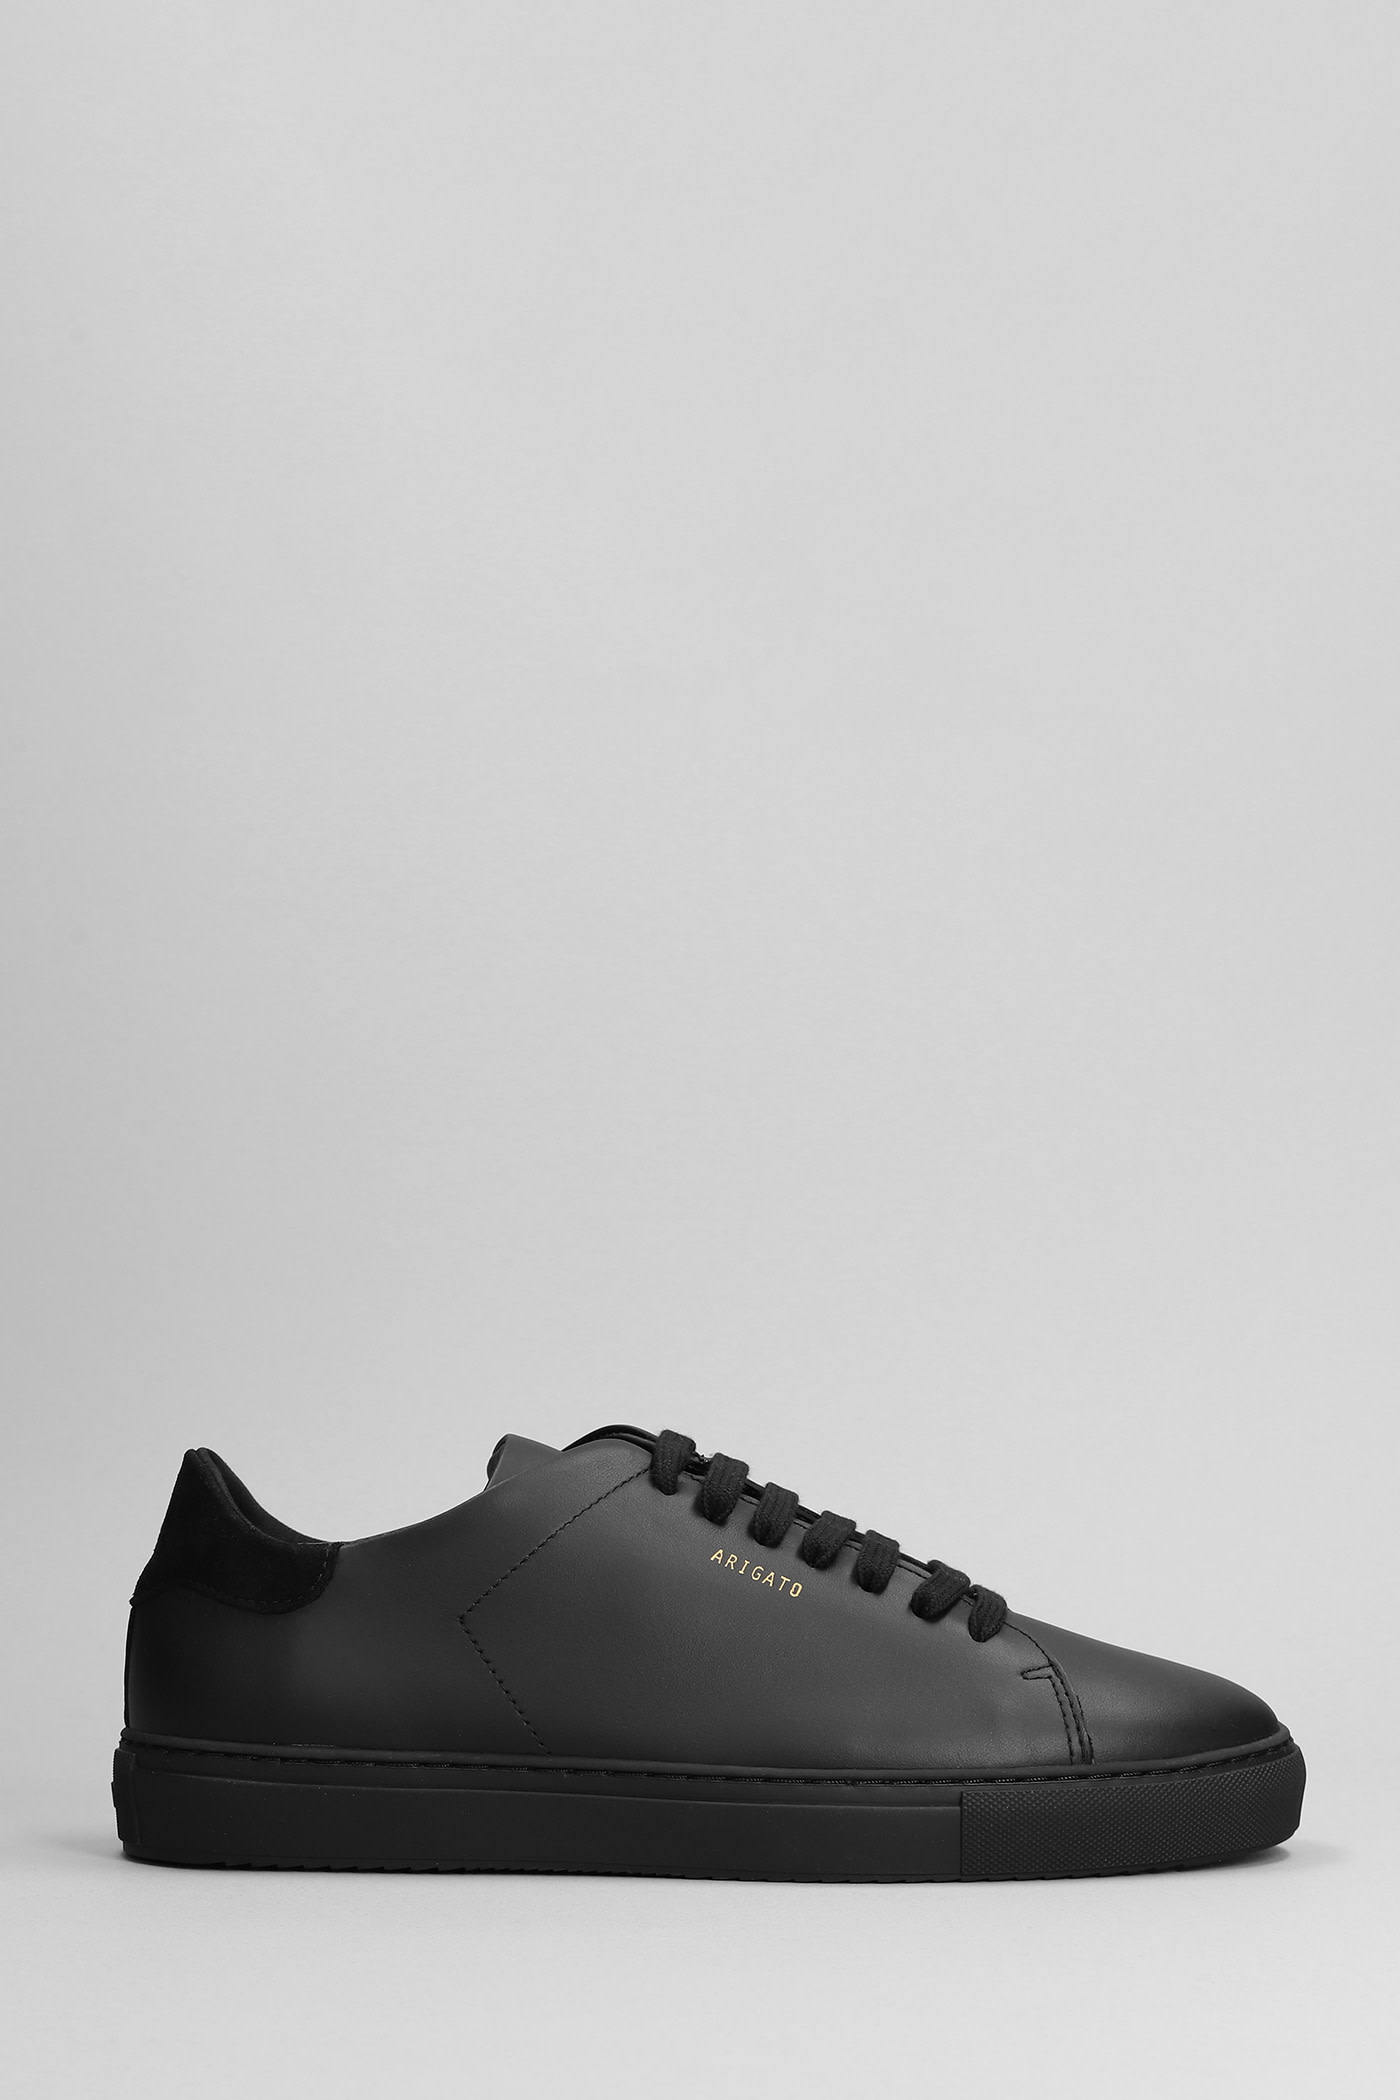 Axel Arigato Clean 90 Sneakers In Black Suede And Leather